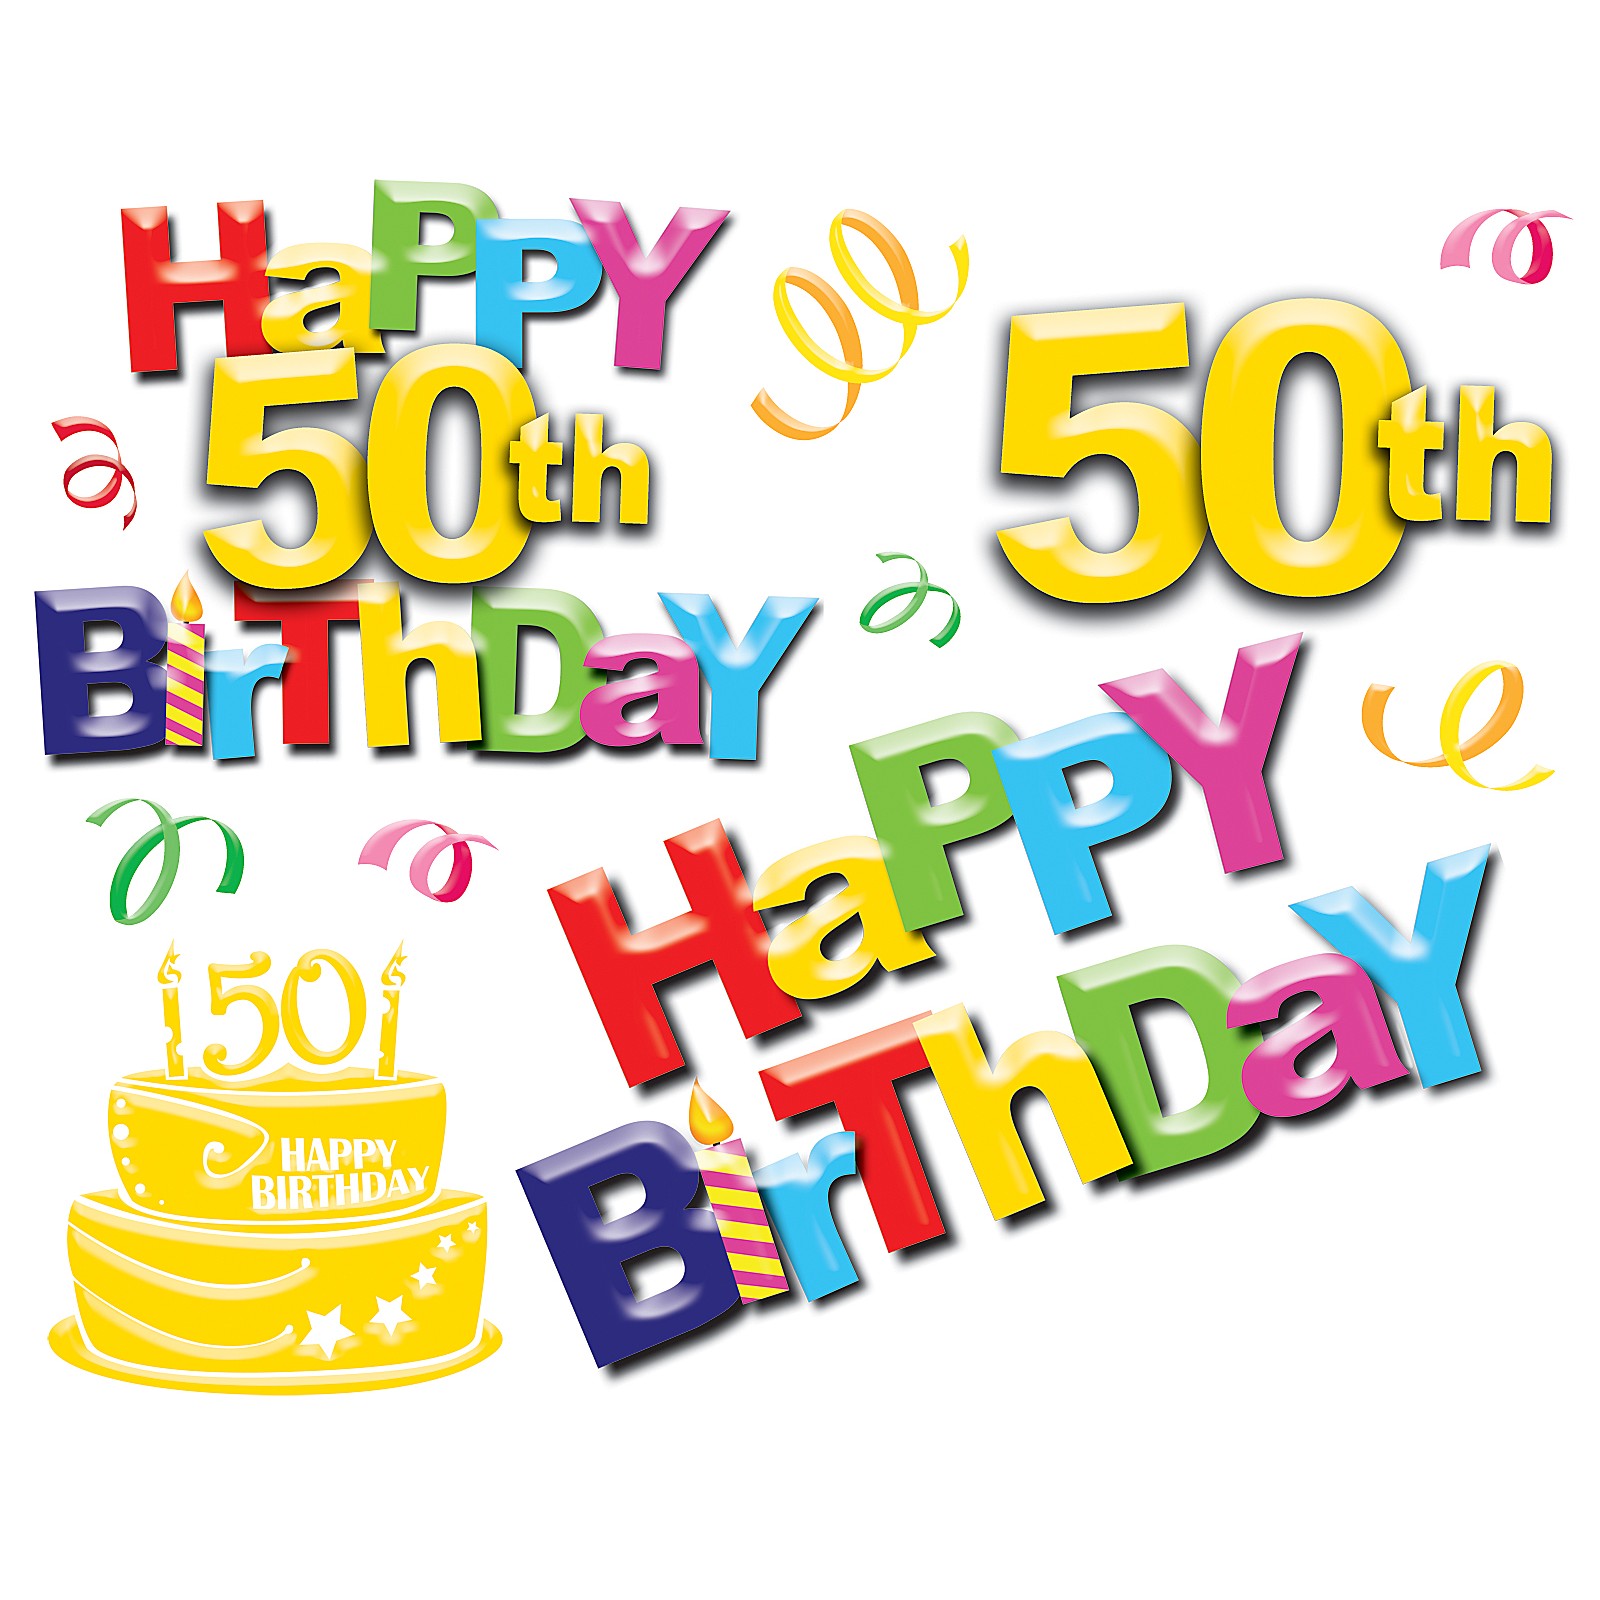 free funny birthday clip art images - photo #25